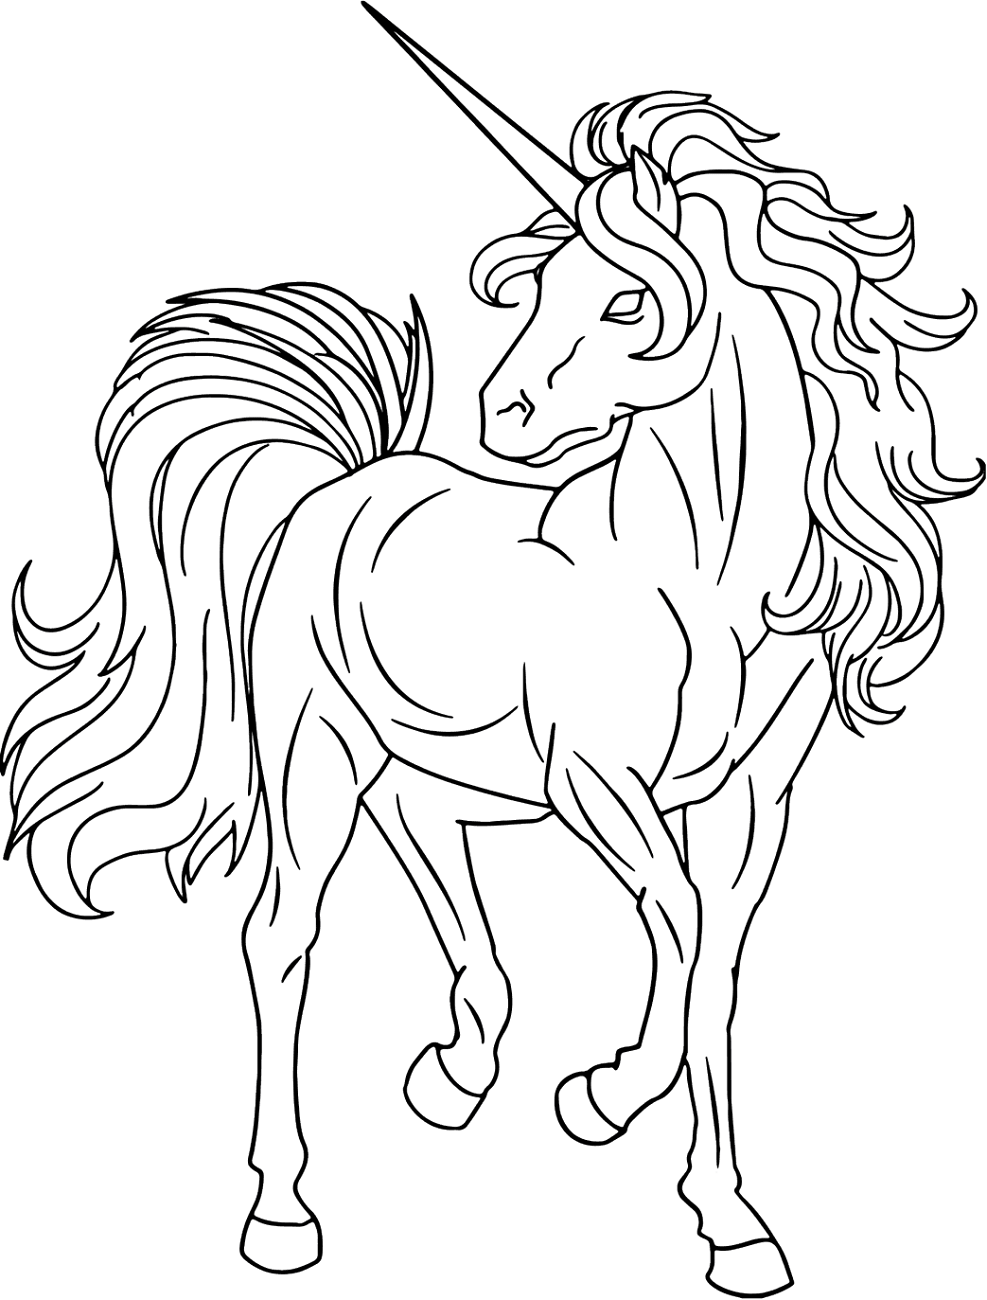 Awesome Unicorn Coloring Page - Free Printable Coloring ...